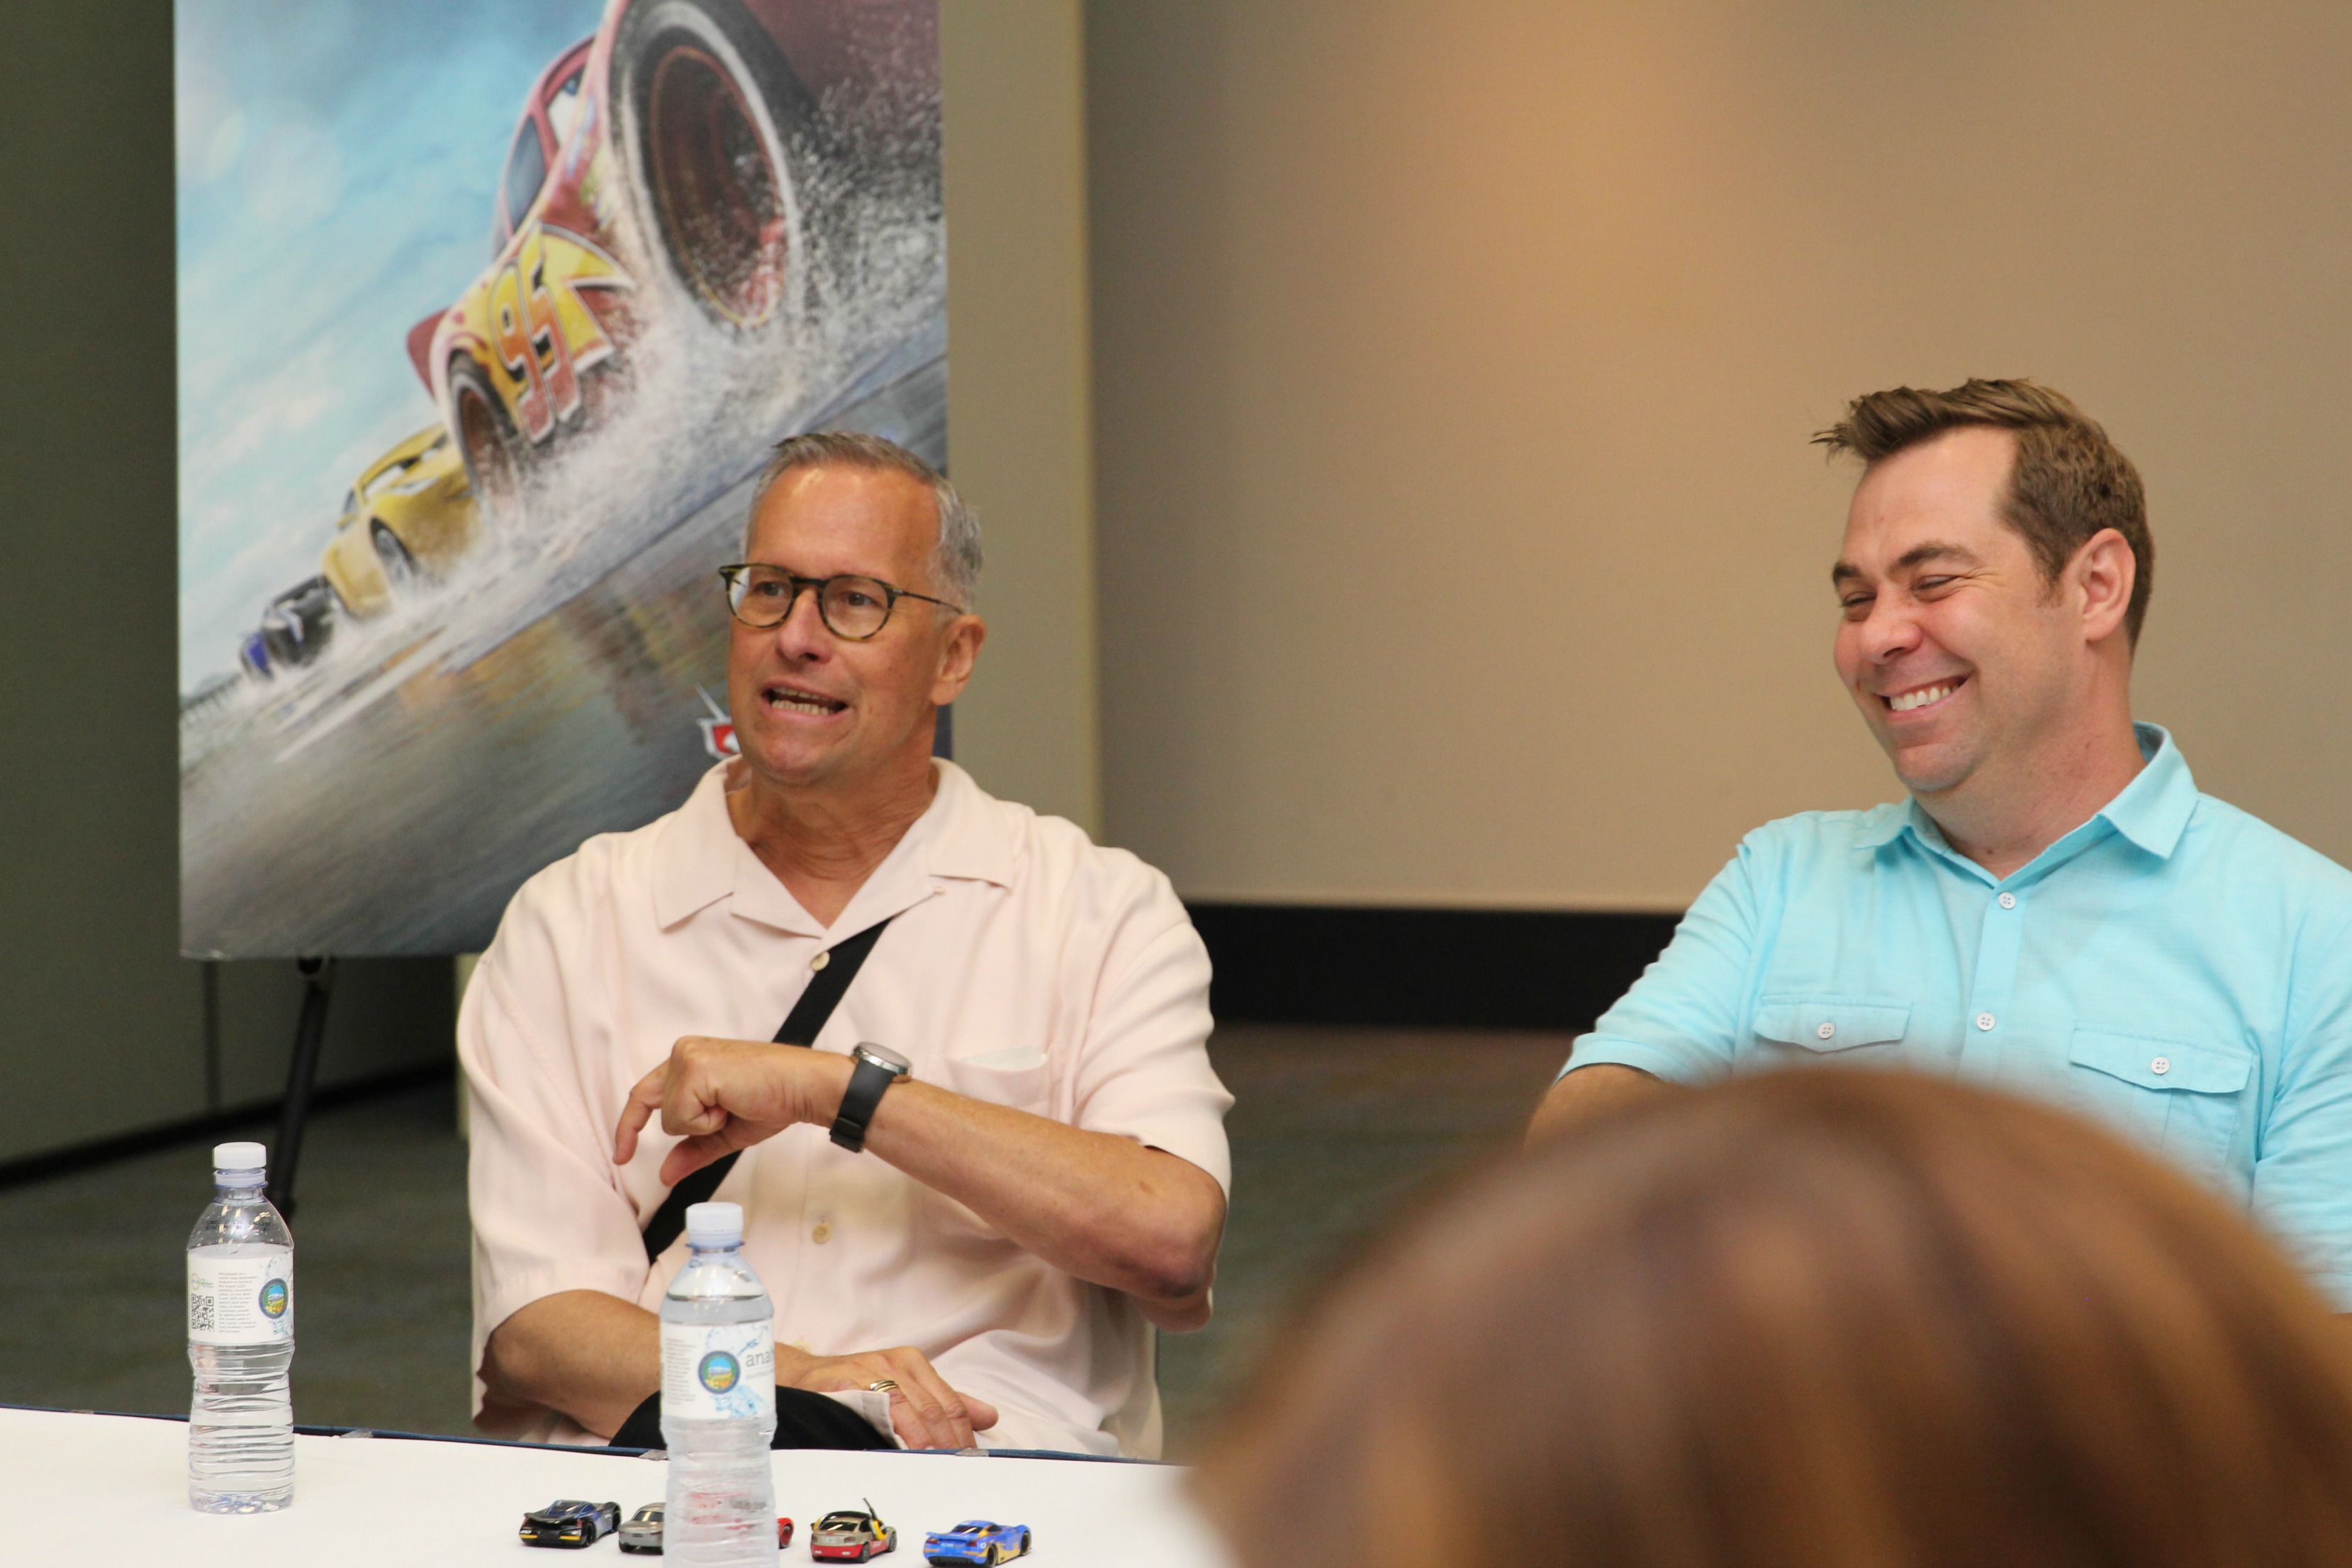 Interview with Cars 3 Director and Producer